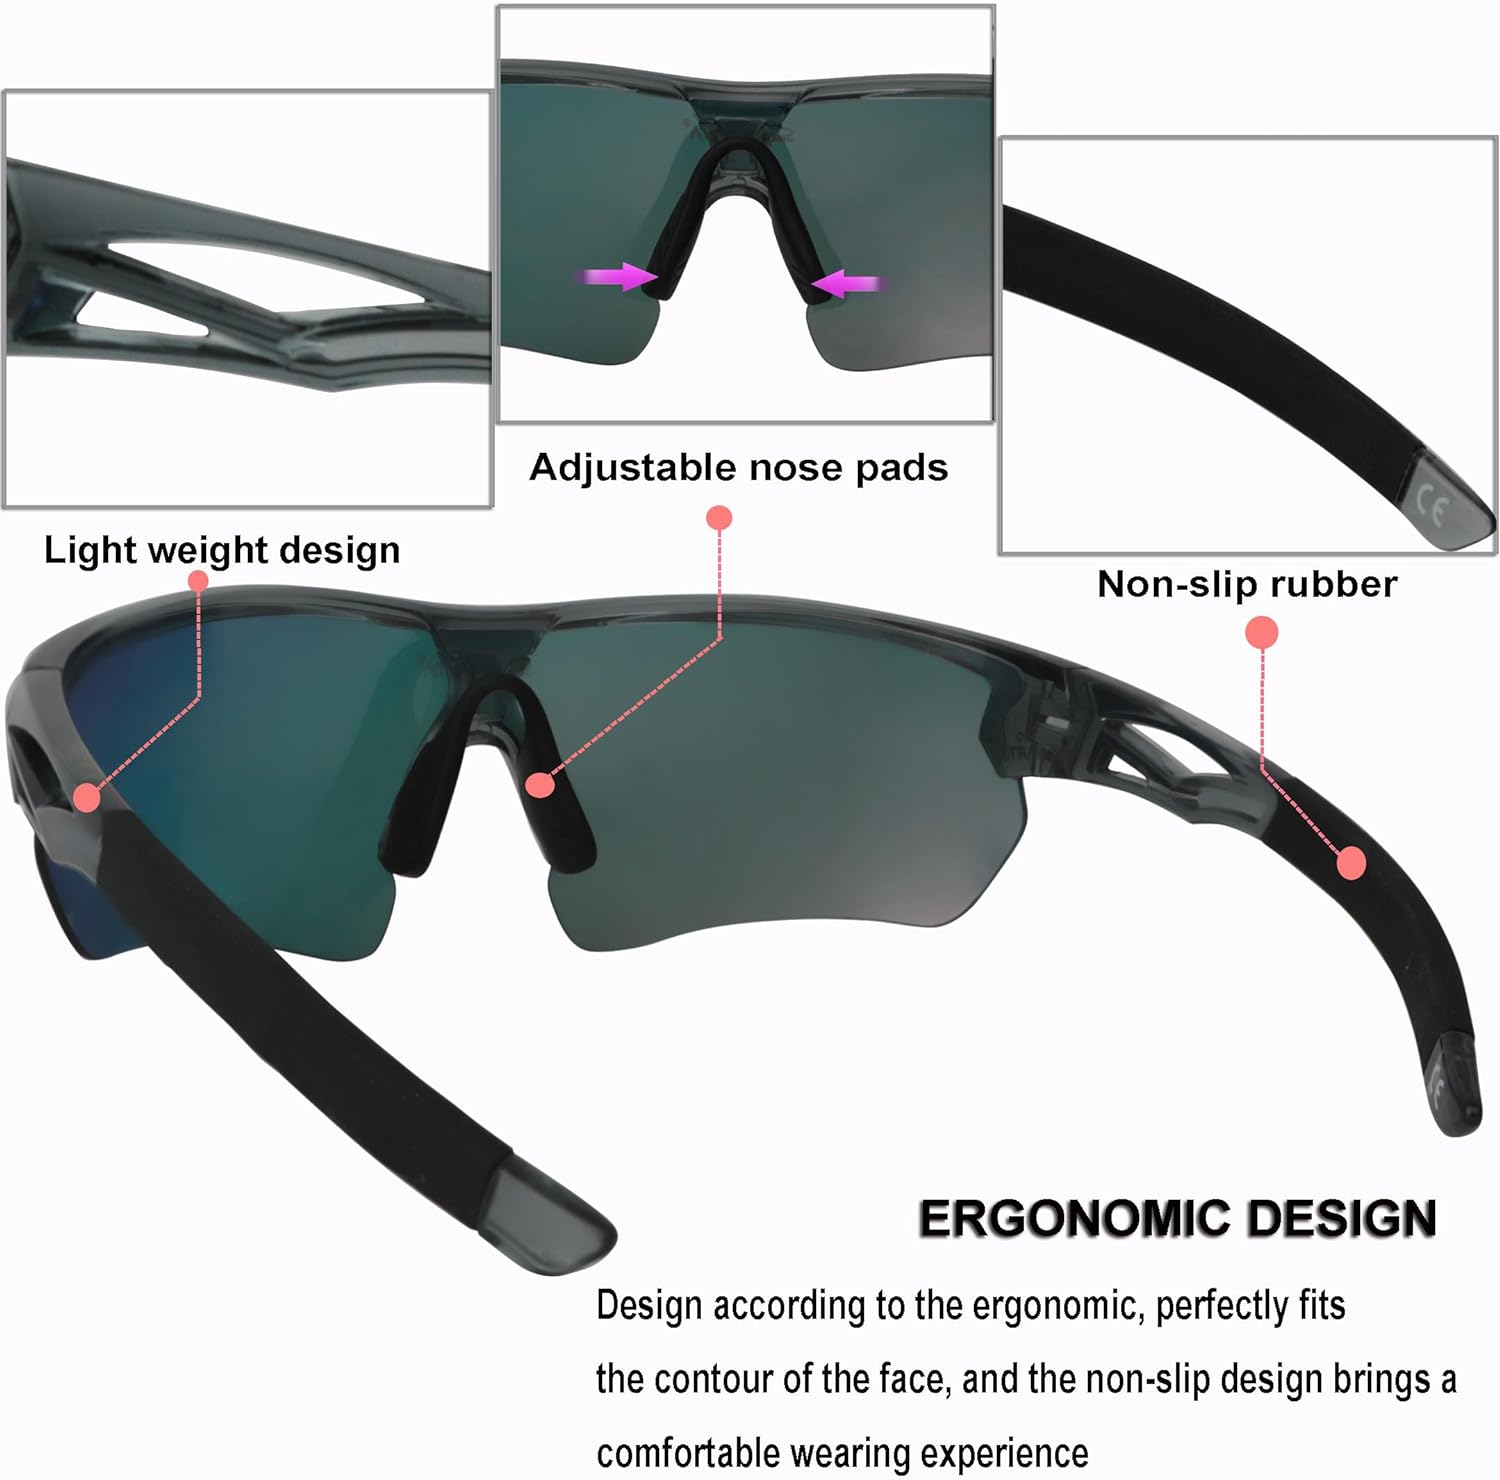 Polarized Sports Sunglasses UV400 with 5 Interchangeable Lenses,Mens Womens Baseball Driving Fishing Golf Running Cycling Glasses